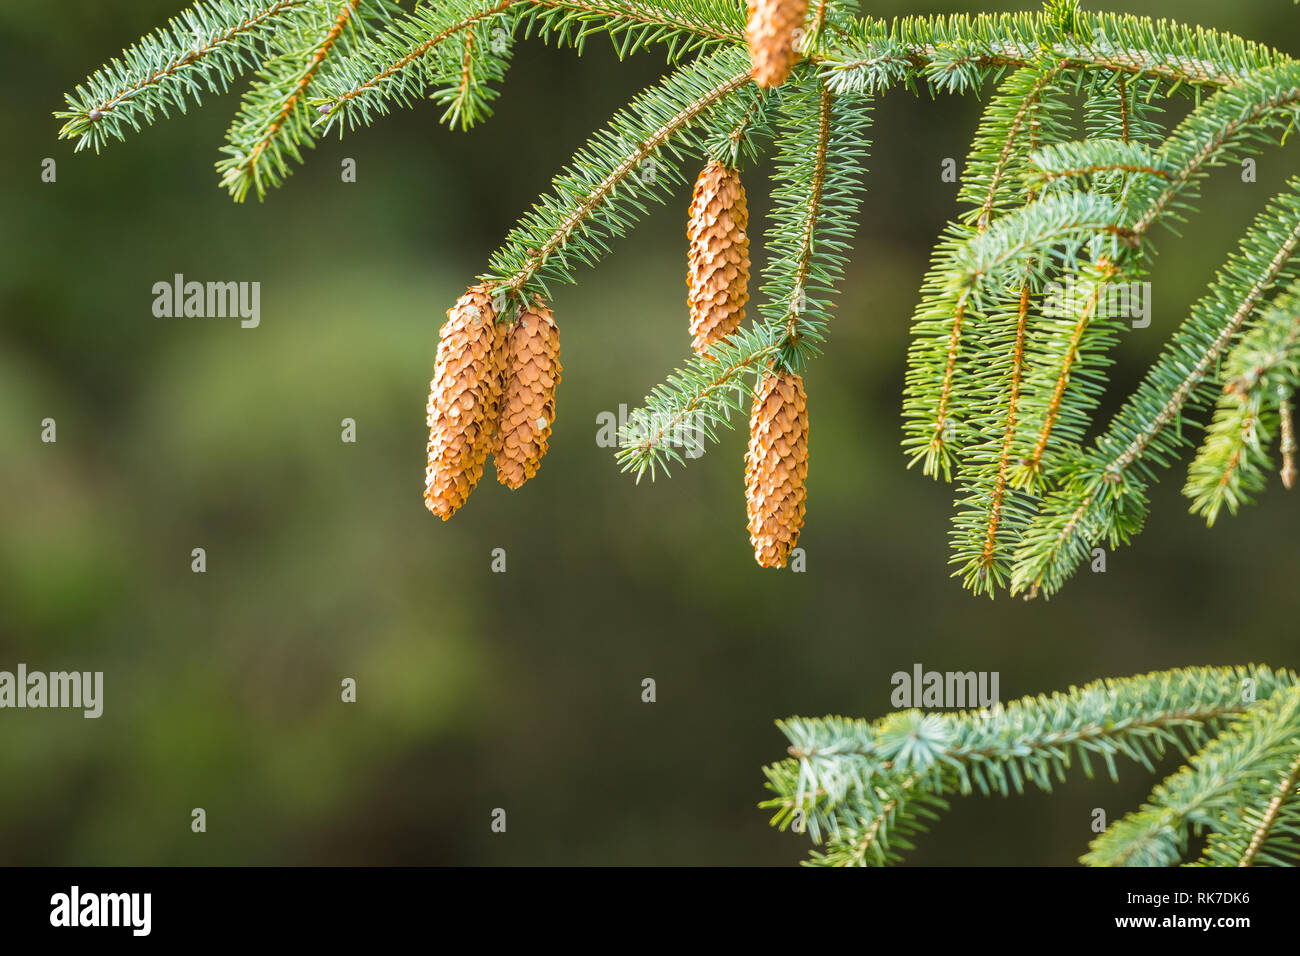 Branch of an Evergreen, a Spruce tree with large pine cones and colourful pine needles. Blurred green background. Nature concept. Space for copy. Stock Photo